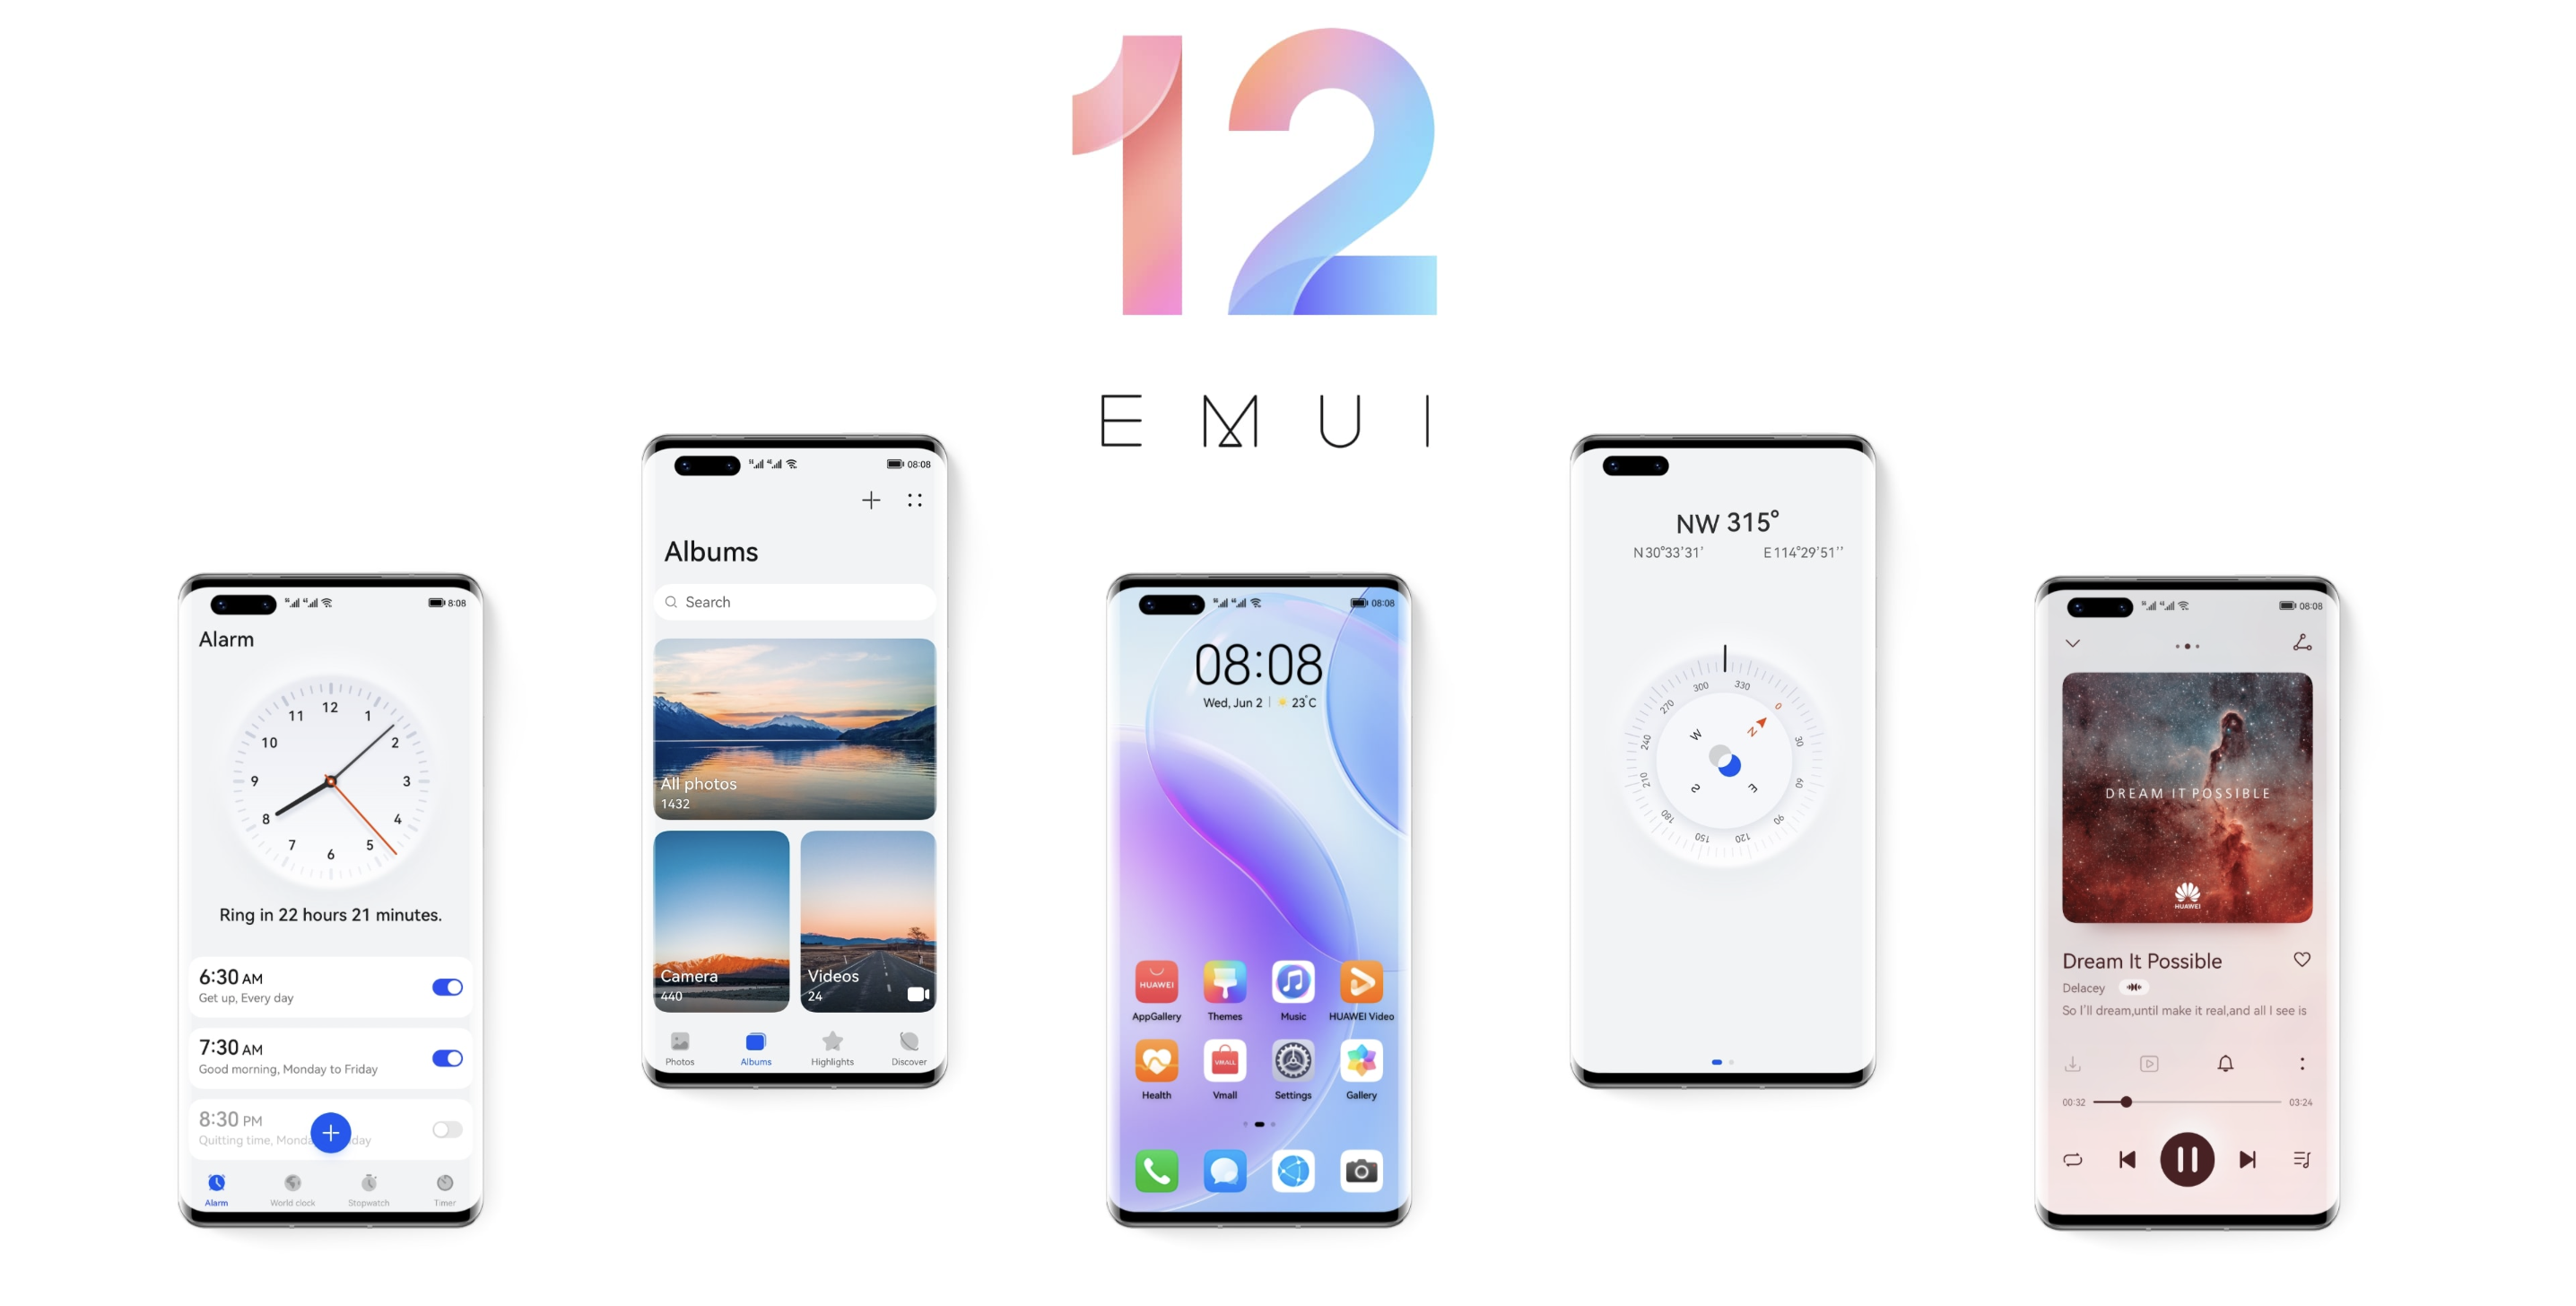 Unexpectedly: Huawei unveiled EMUI 12 with new features and updated interface